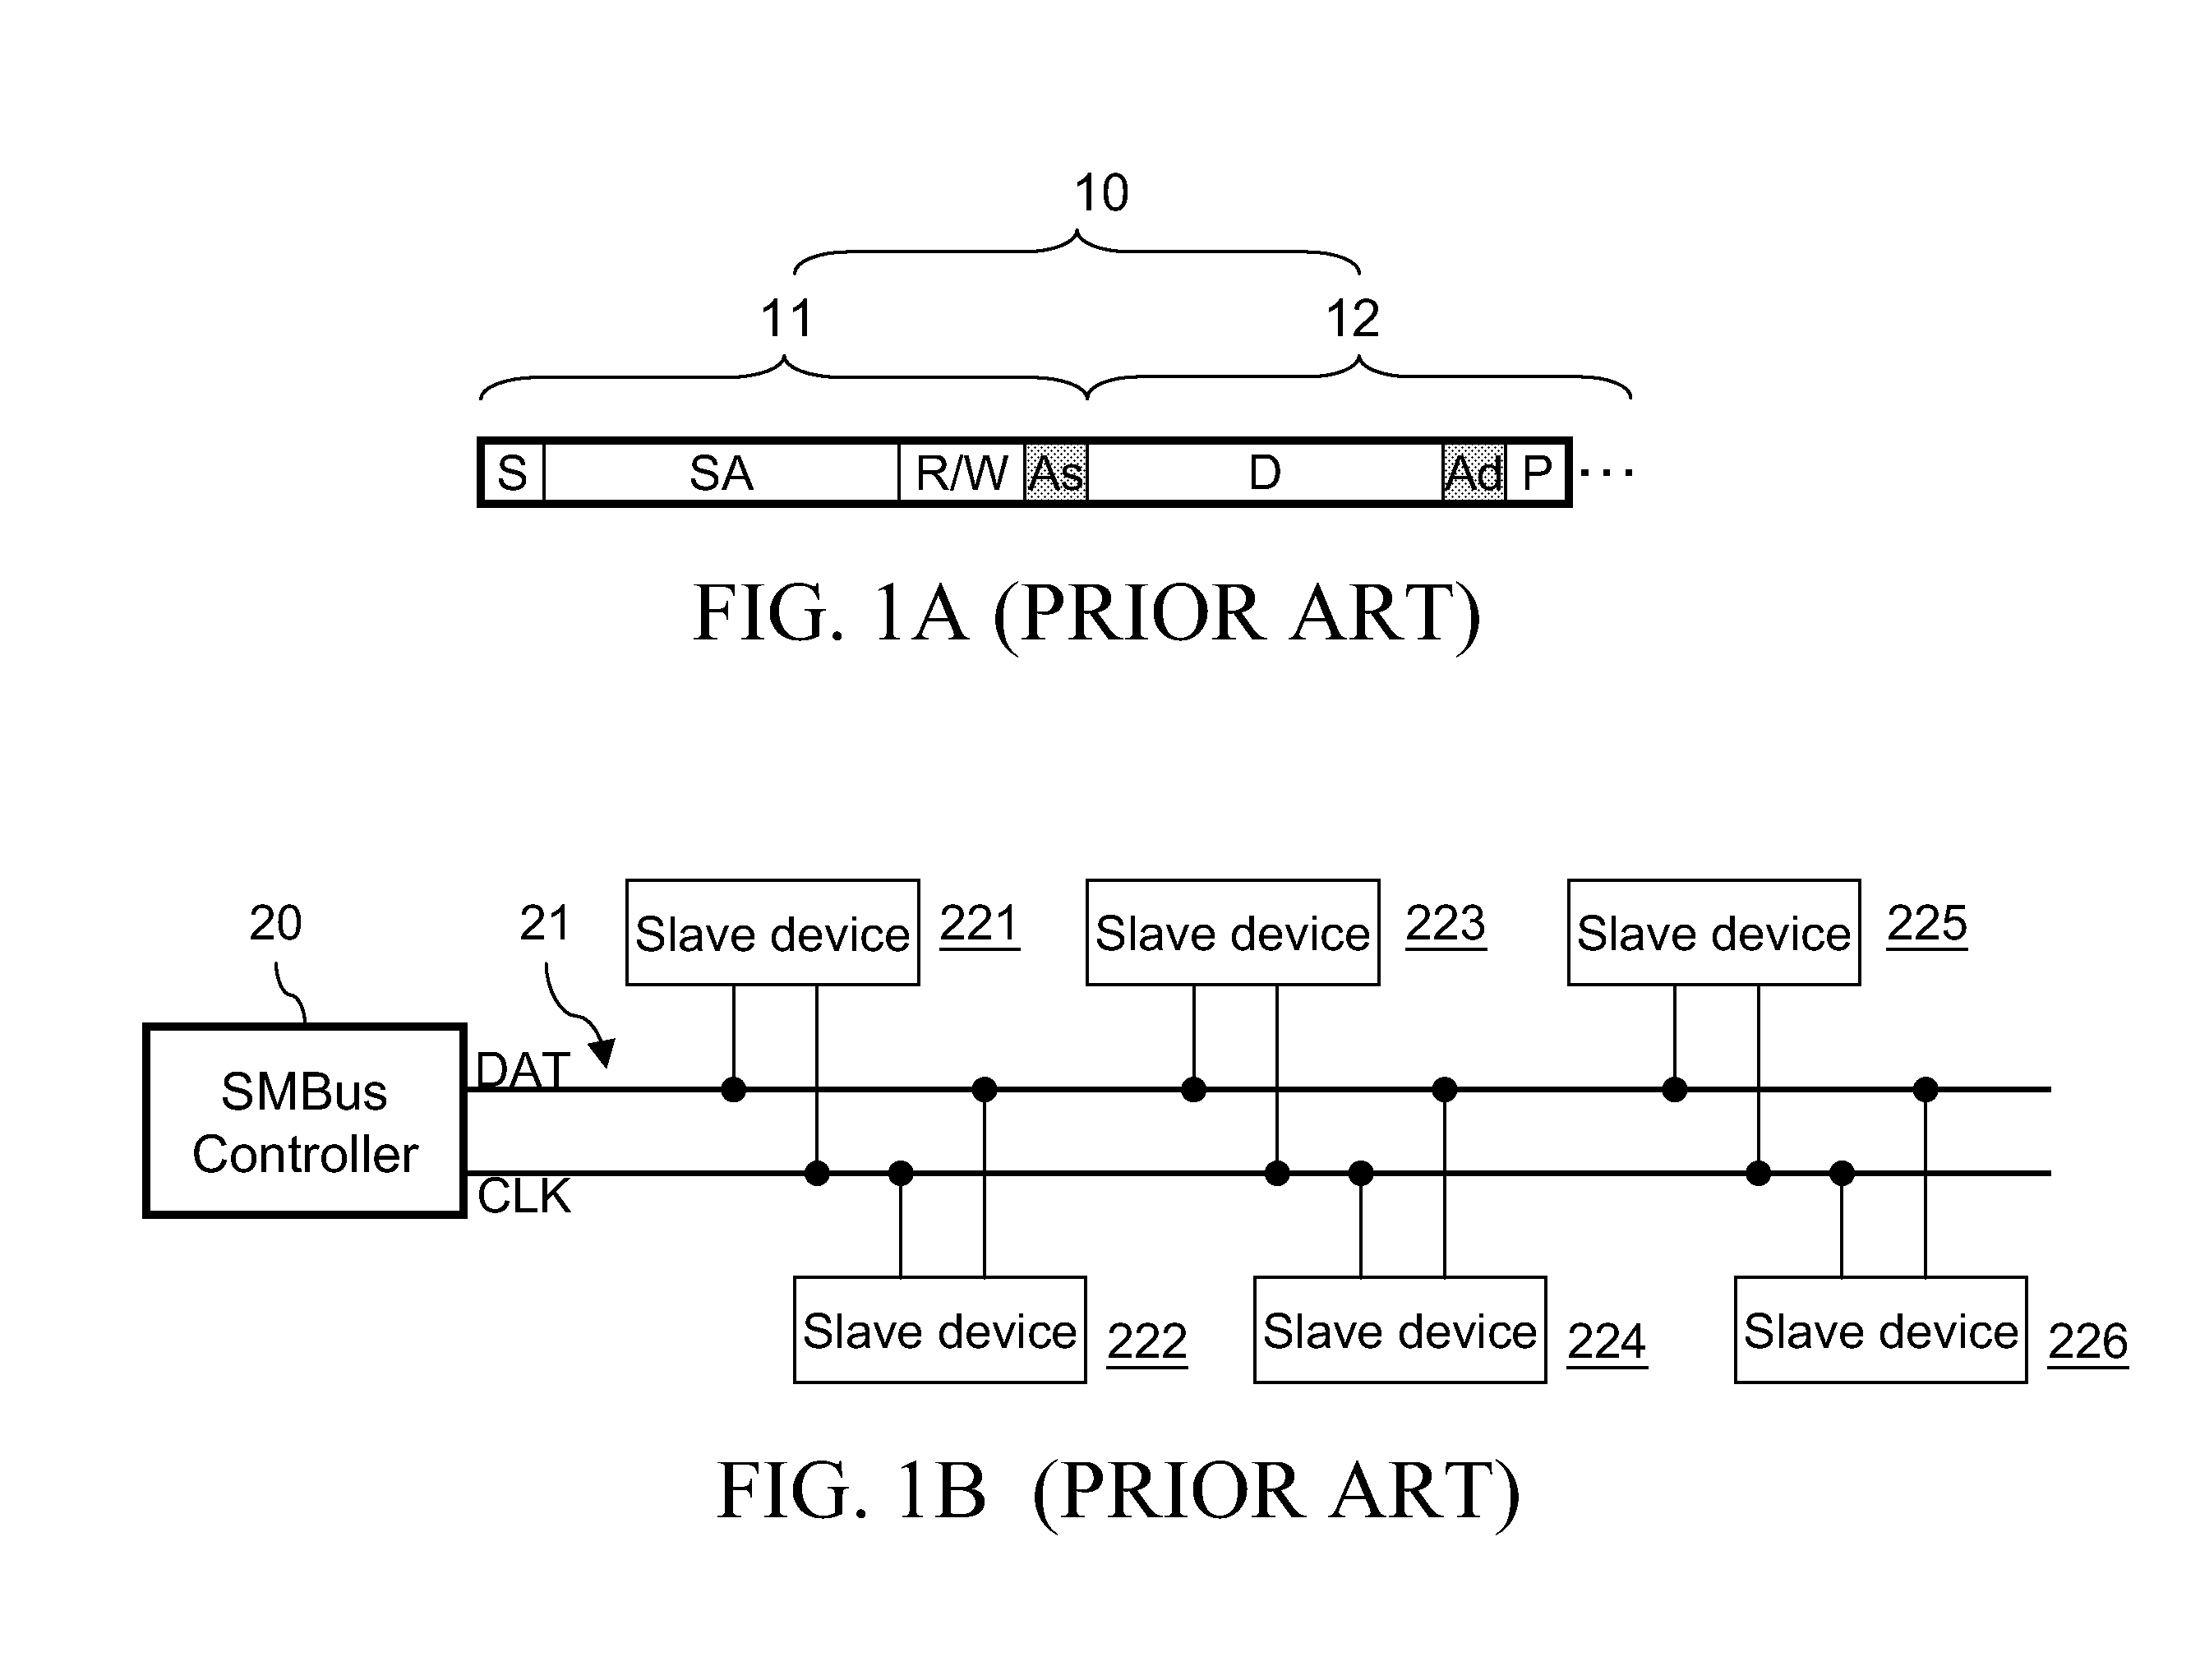 Apparatus and method for scanning slave addresses of smbus slave devices